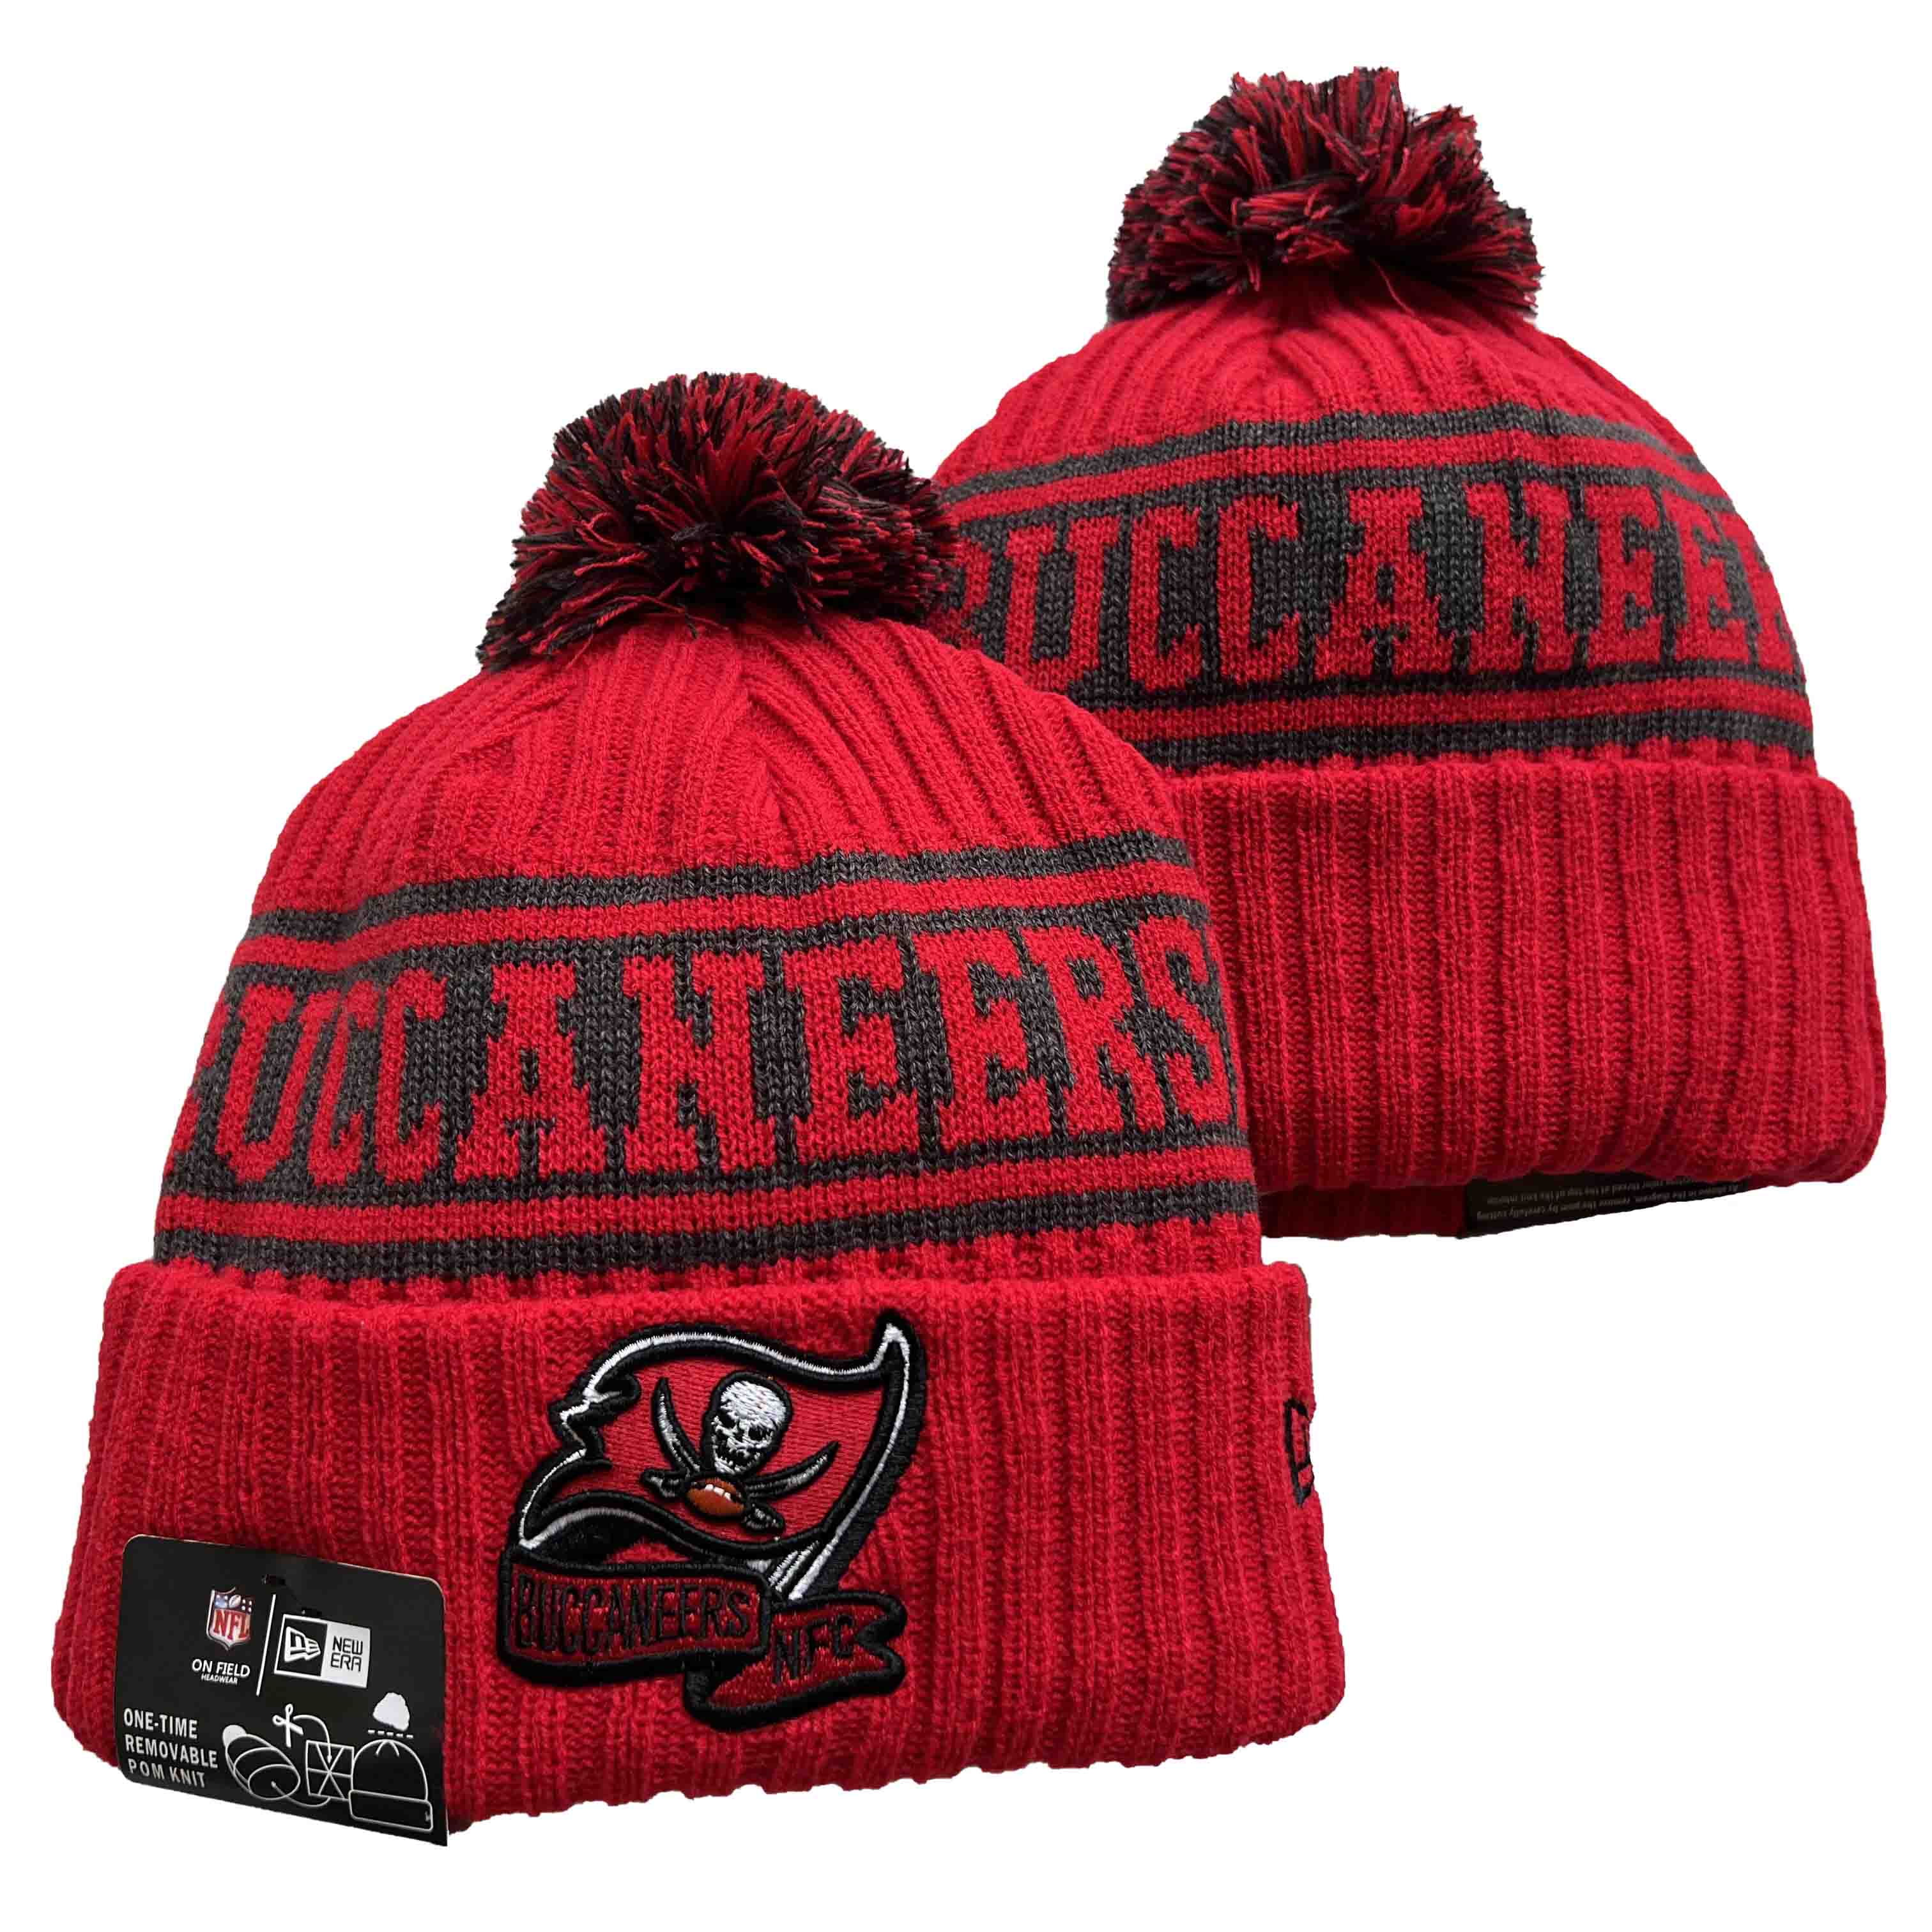 NFL Tampa Bay Buccaneers Beanies Knit Hats-YD1282